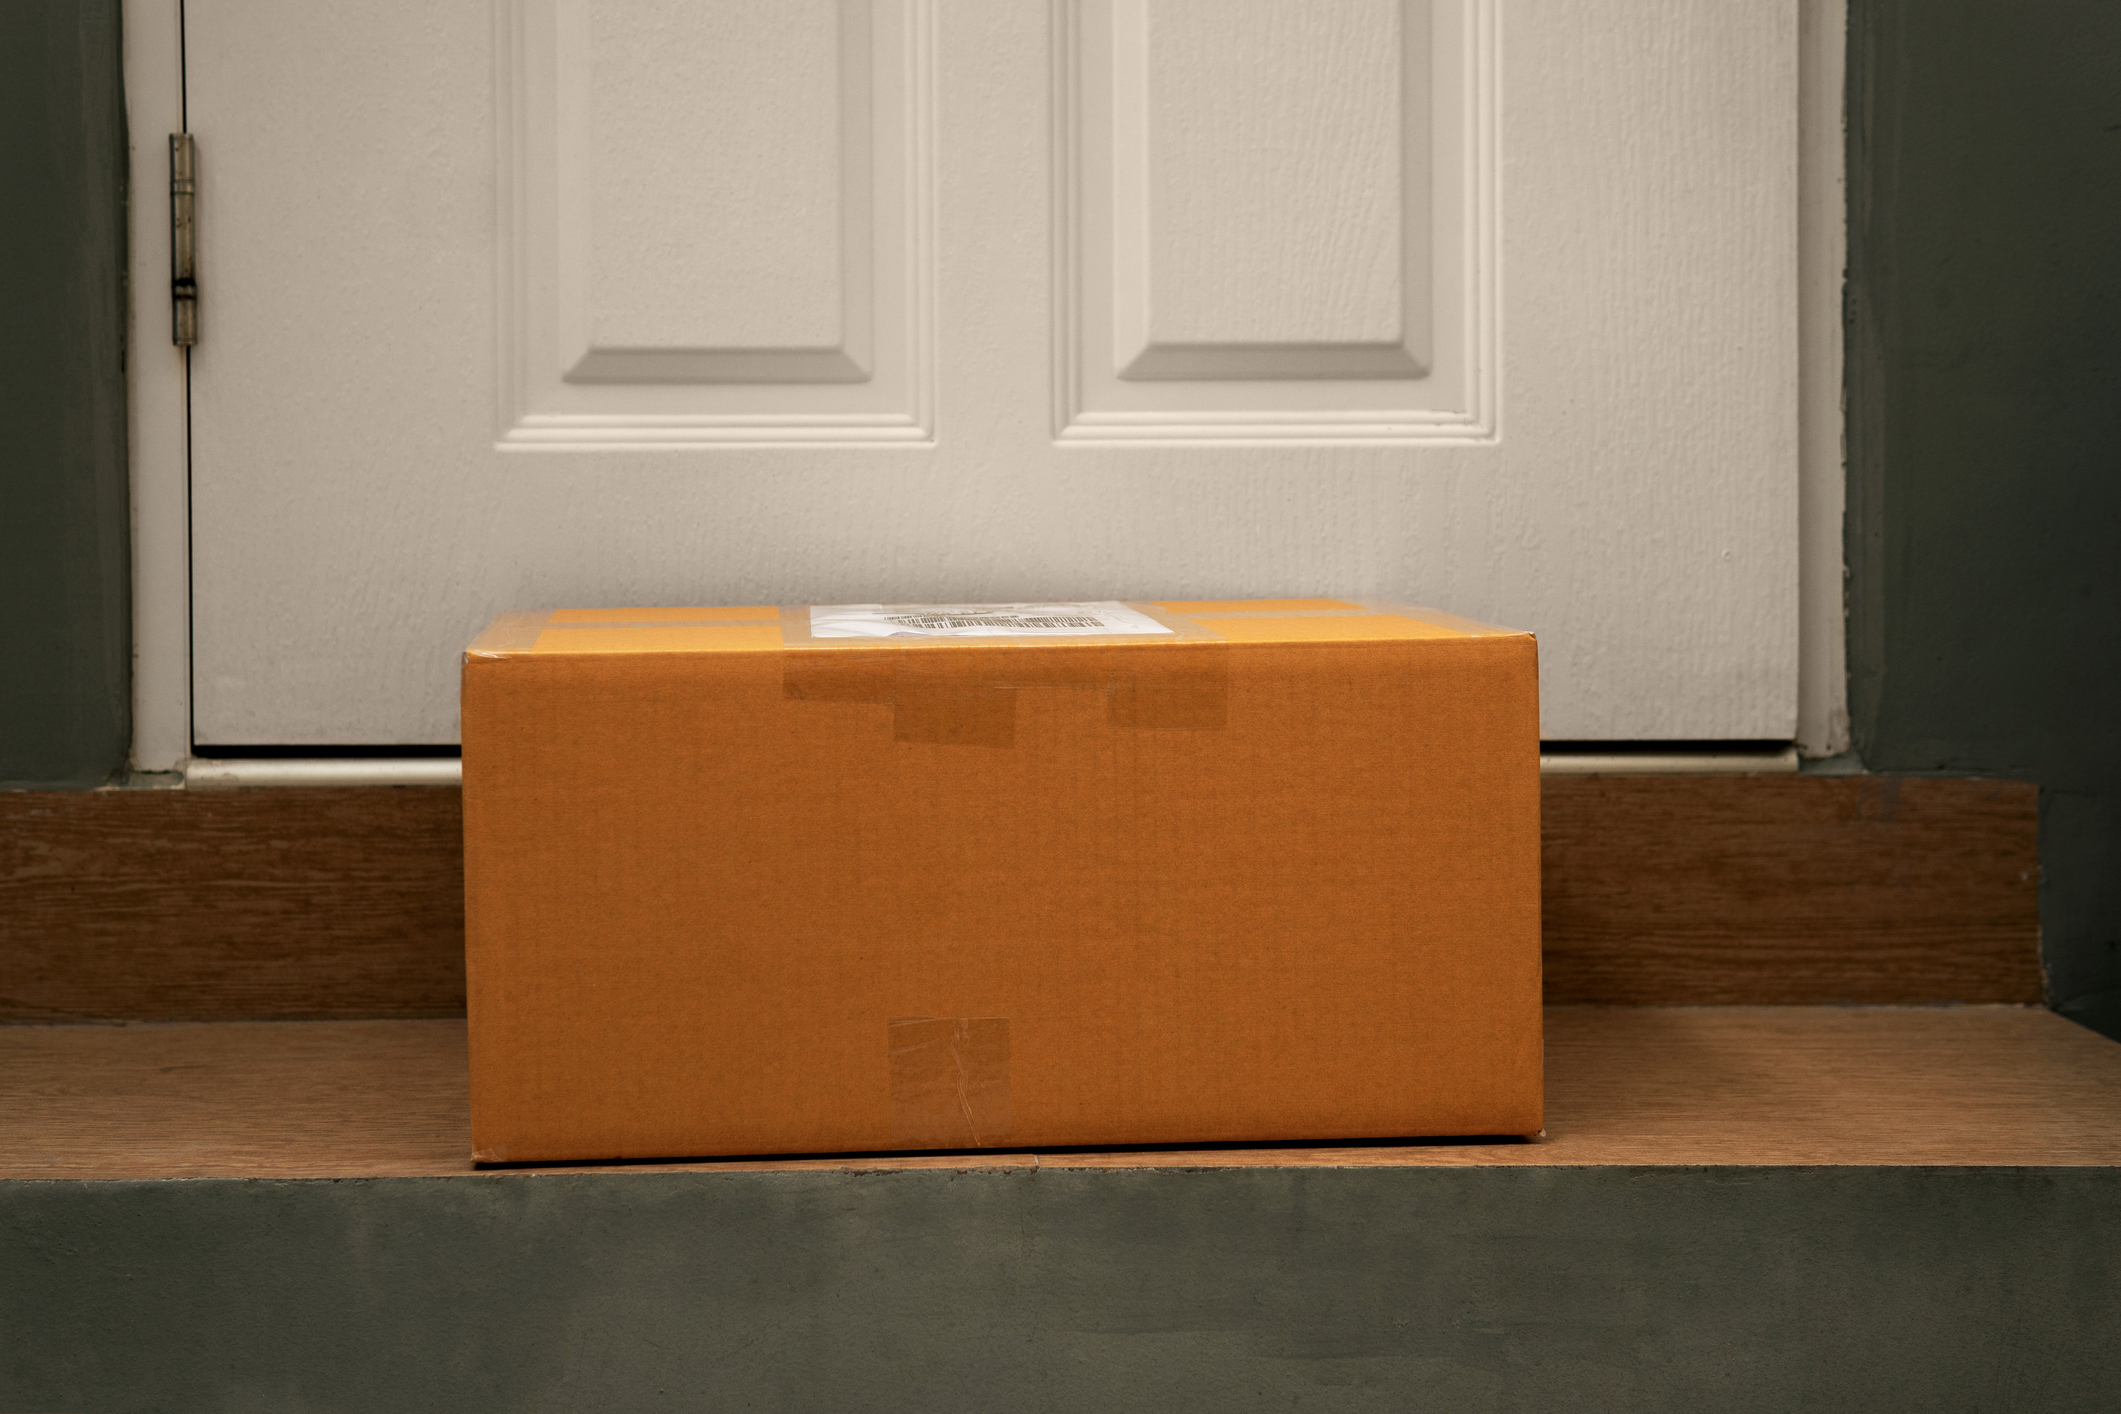 A cardboard box lying outside the front door | Source: Getty Images